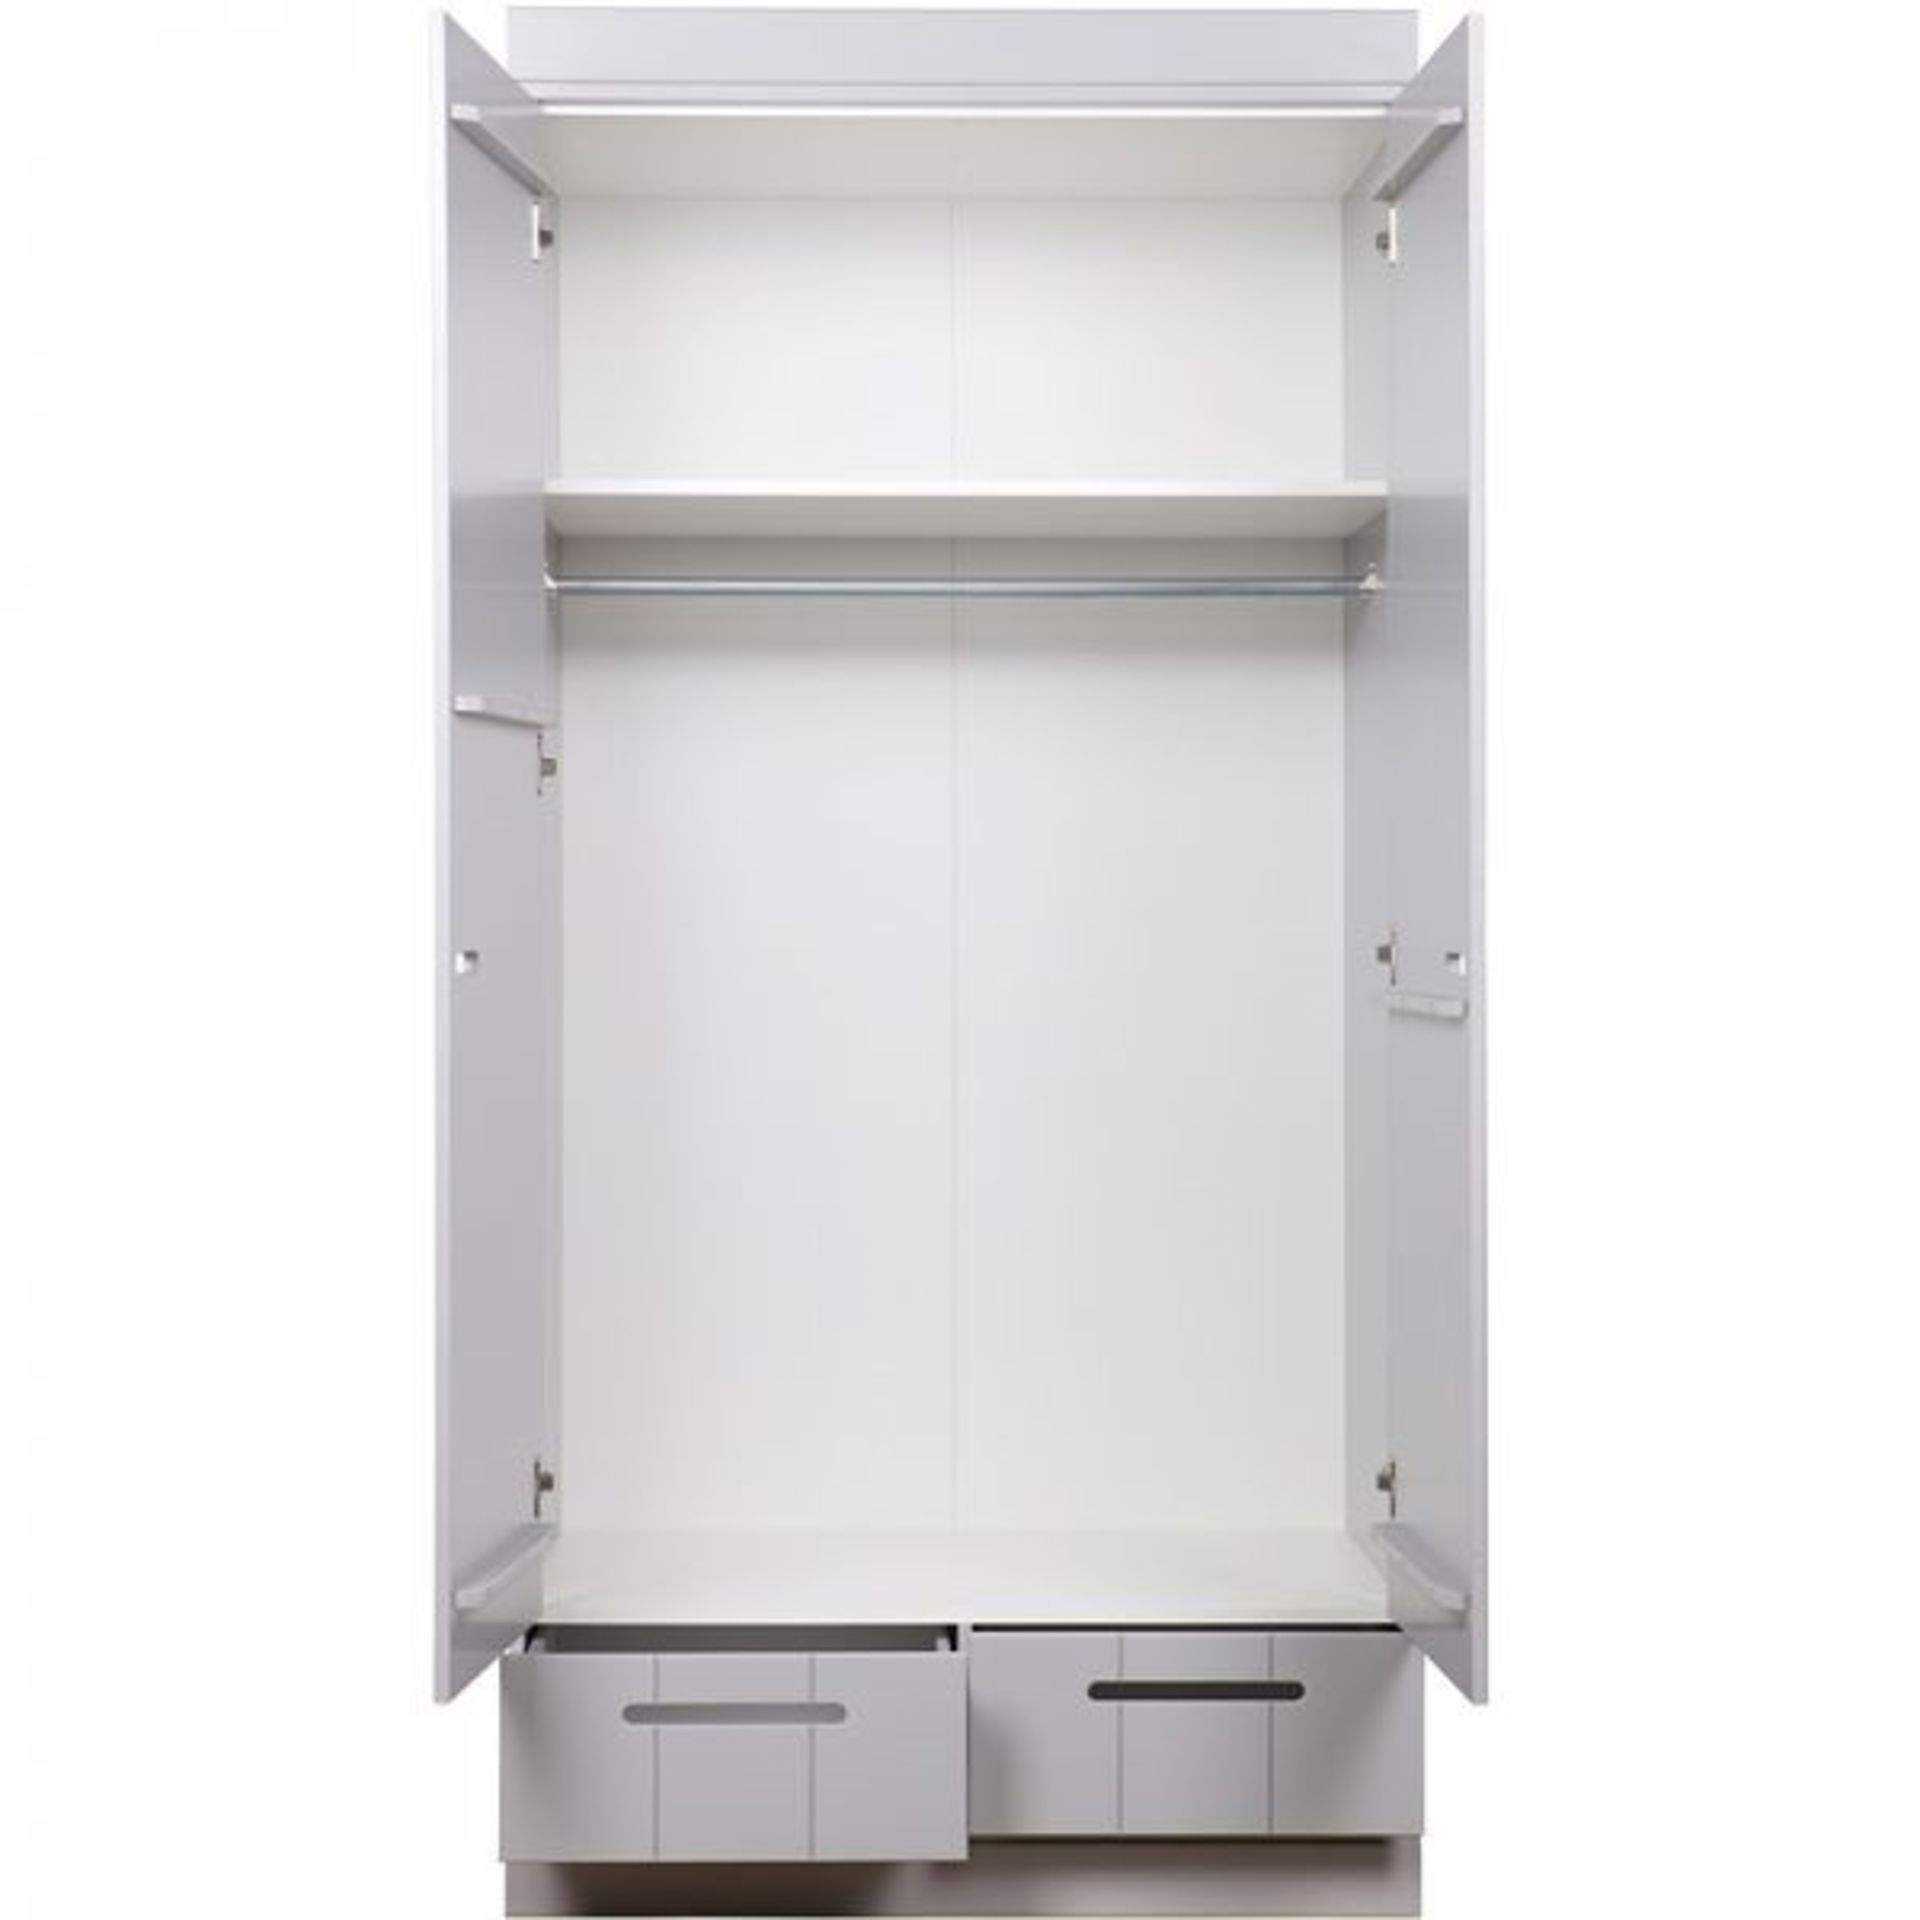 1 x WOOOD Designs 'Connect' Solid Wood Scandinavian Style 2-Door 2 Drawer Wardrobe In WHITE - Boxed - Image 2 of 8